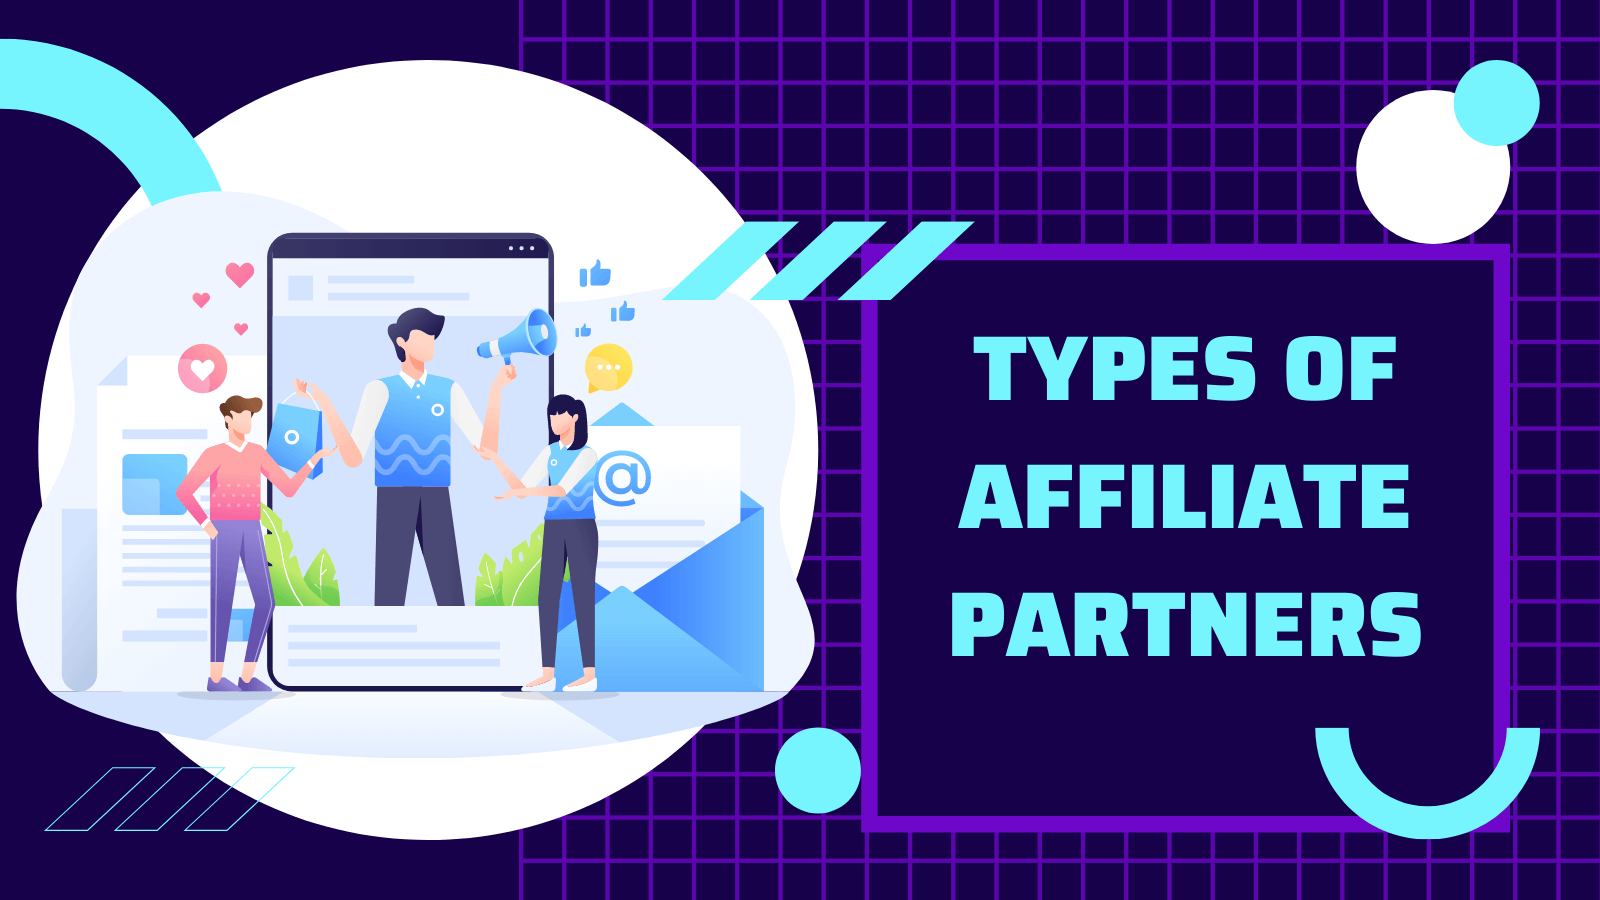 Types of affiliate partners